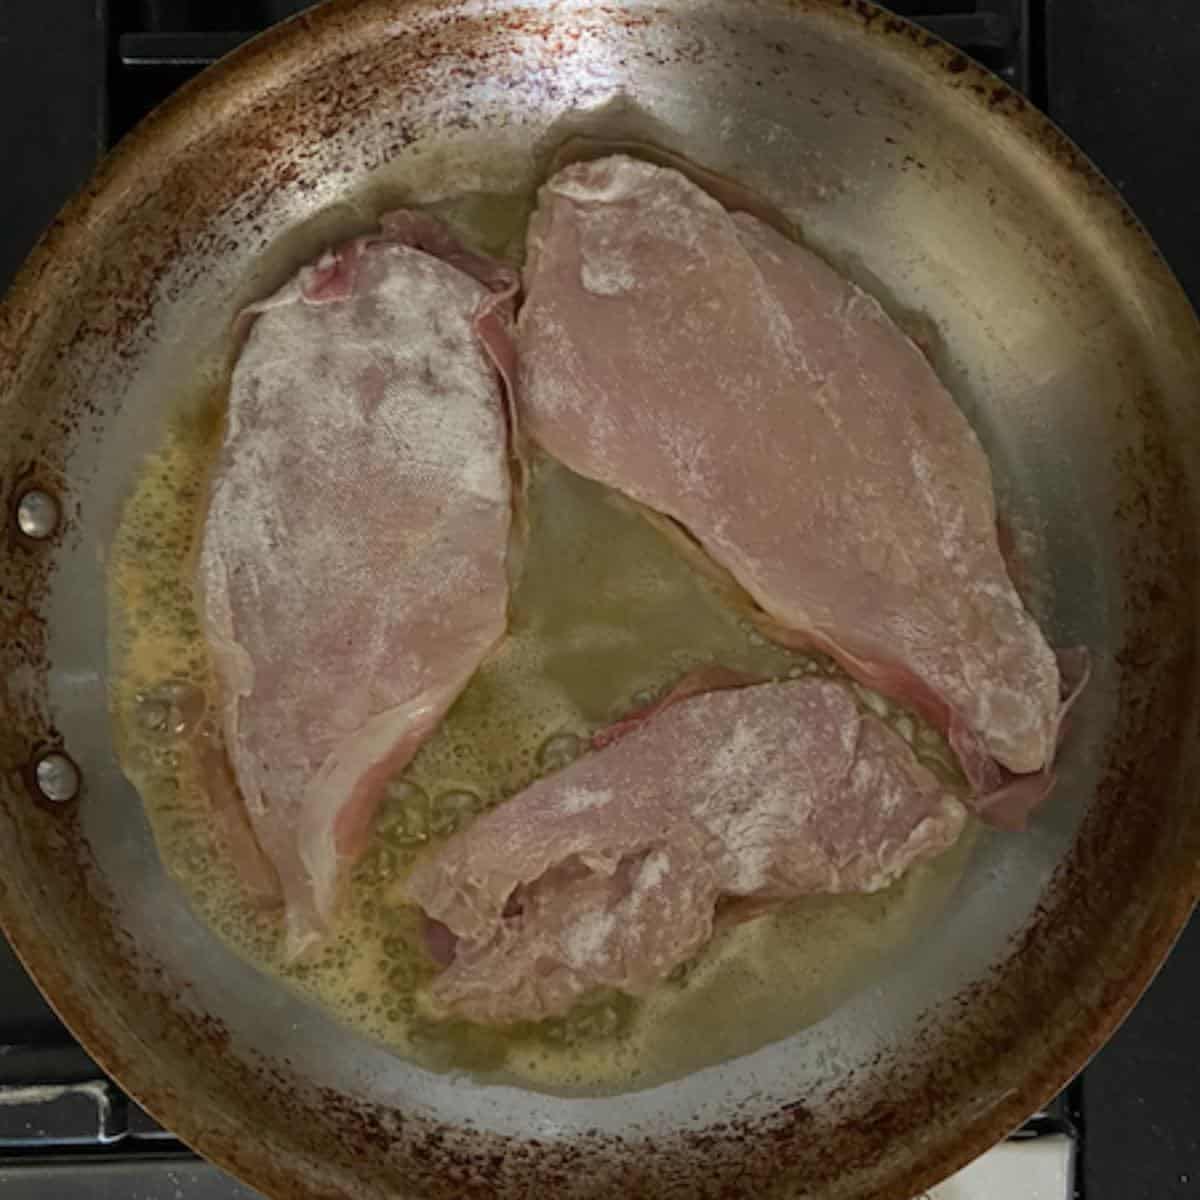 Chicken cooking in skillet prosciutto side down.